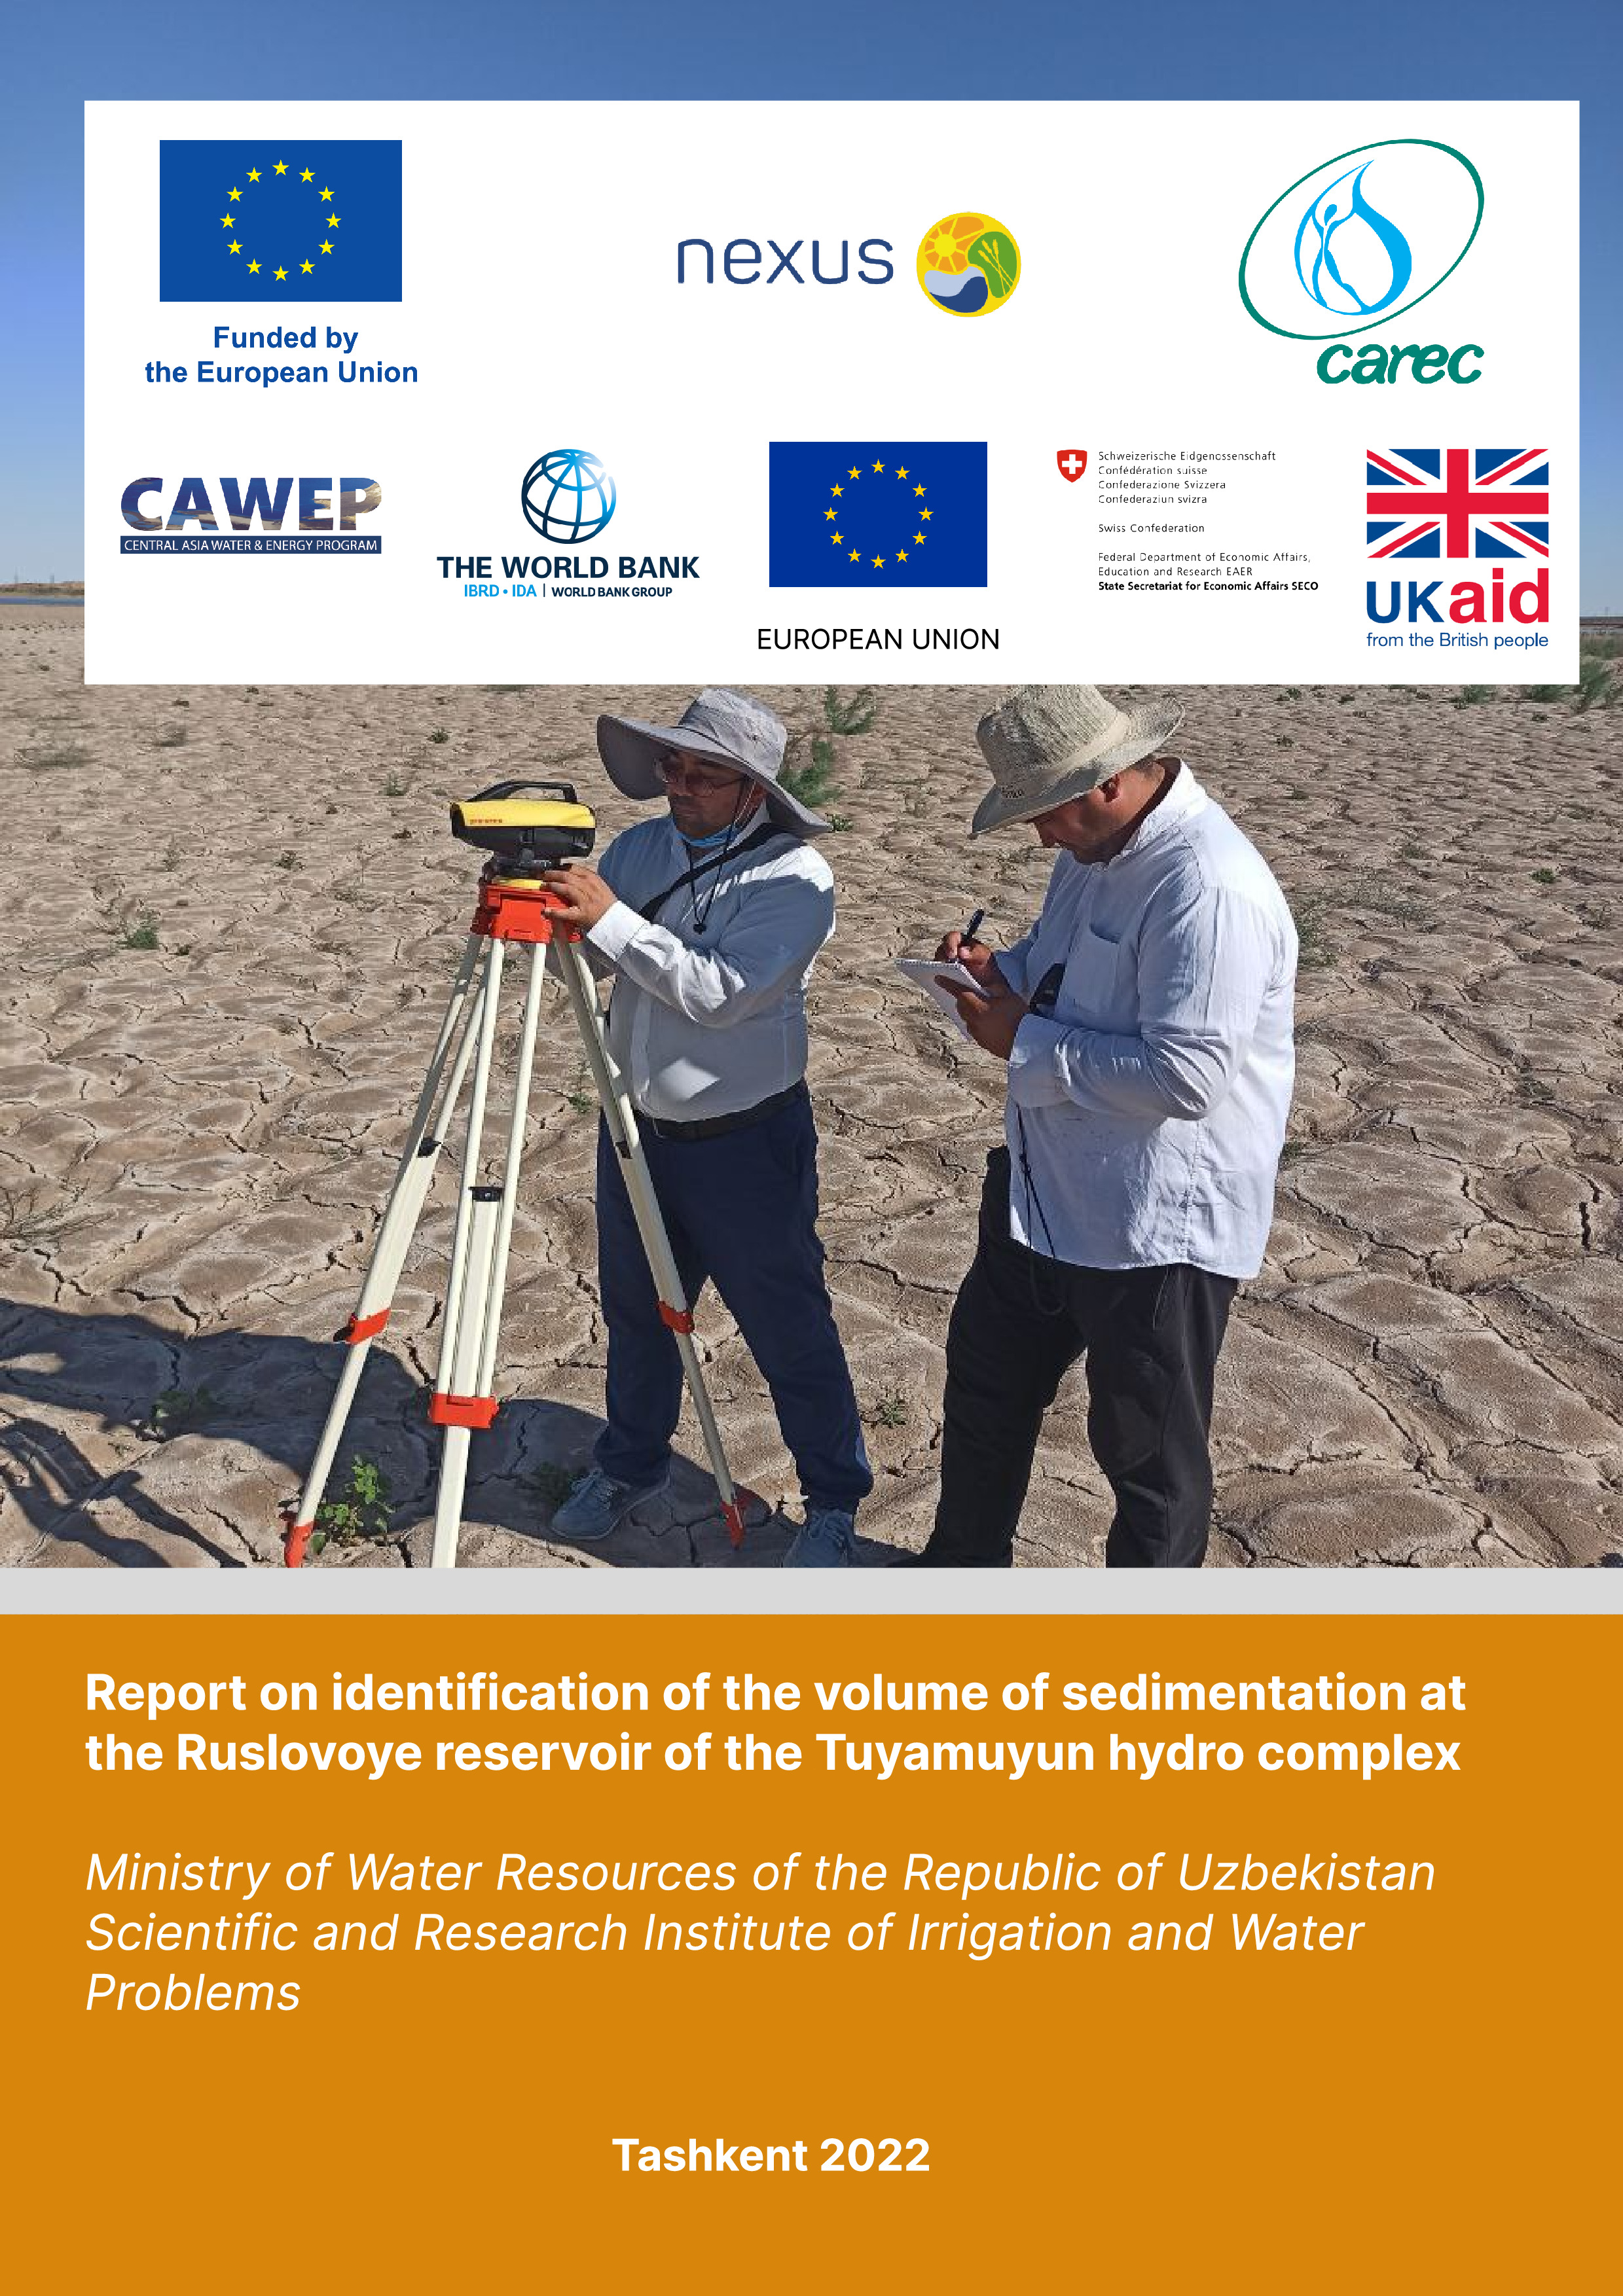 Report on identification of the volume of sedimentation at the Ruslovoye reservoir of the Tuyamuyun hydro complex, 2021